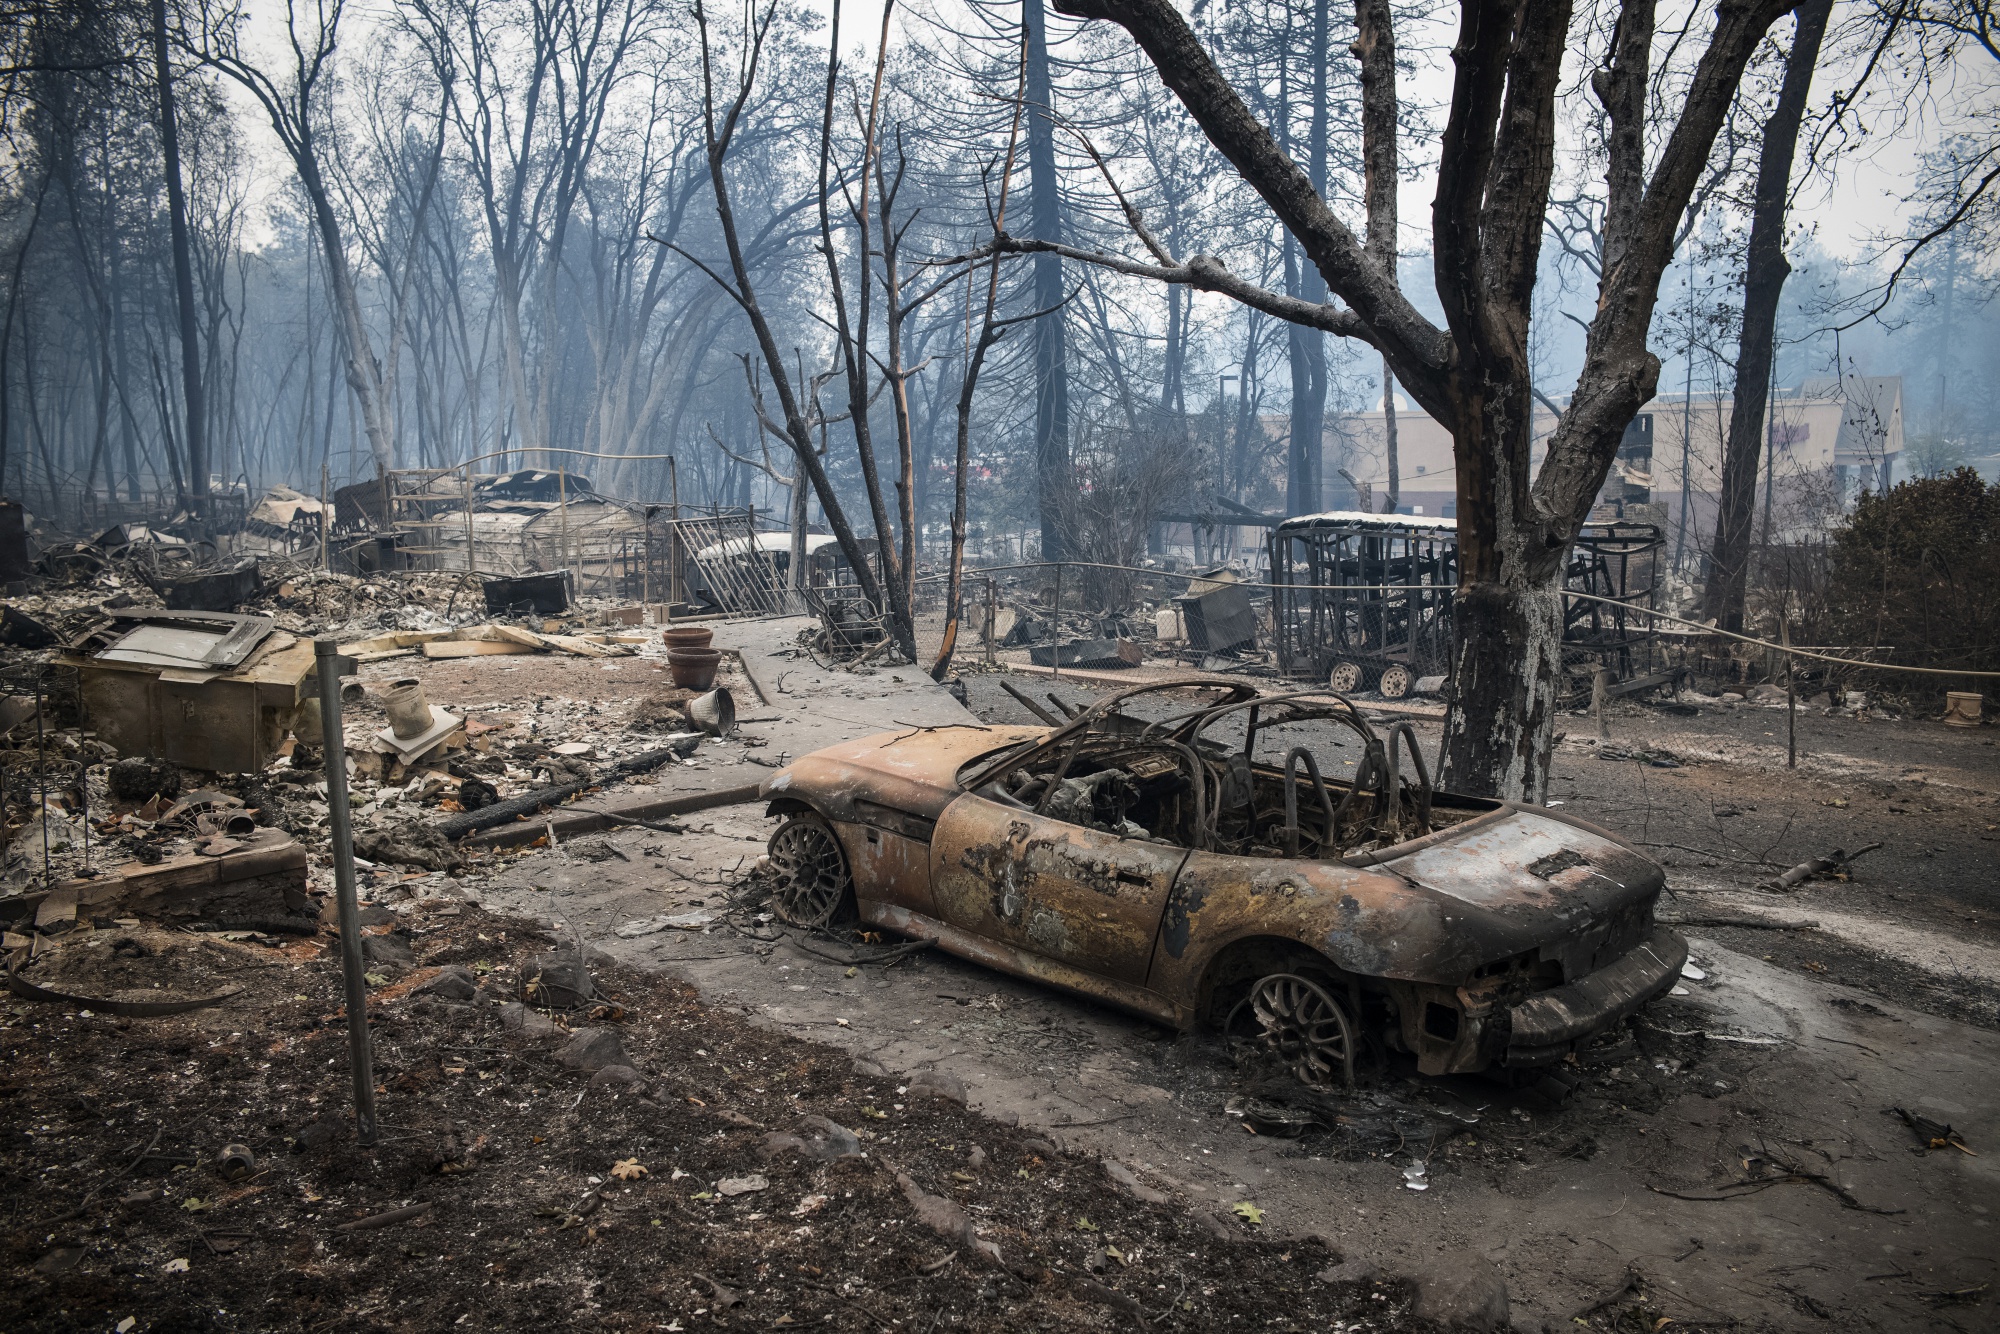 A burned-out vehicle stands after the Camp Fire in Paradise, California in&nbsp;2018.